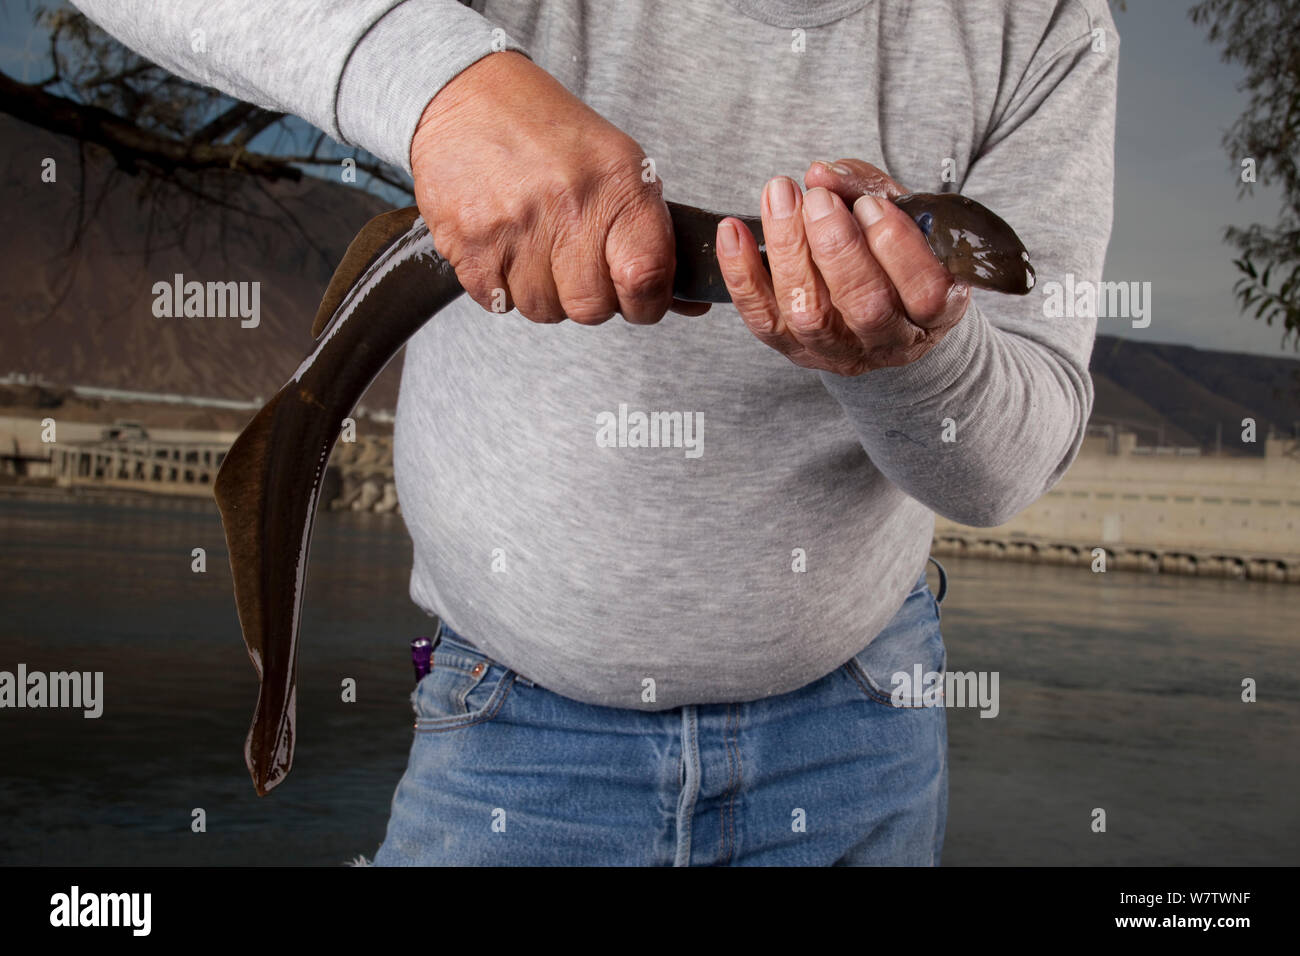 Technical supervisor for the Nez Perce Department Of Fisheries Resources Management holding an adult Three toothed / Pacific lamprey (Lampetra tridentata) before placing it in a holding tank. The Columbia River and the John Day Dam are in the background, Washington, USA, November 2009. Stock Photo